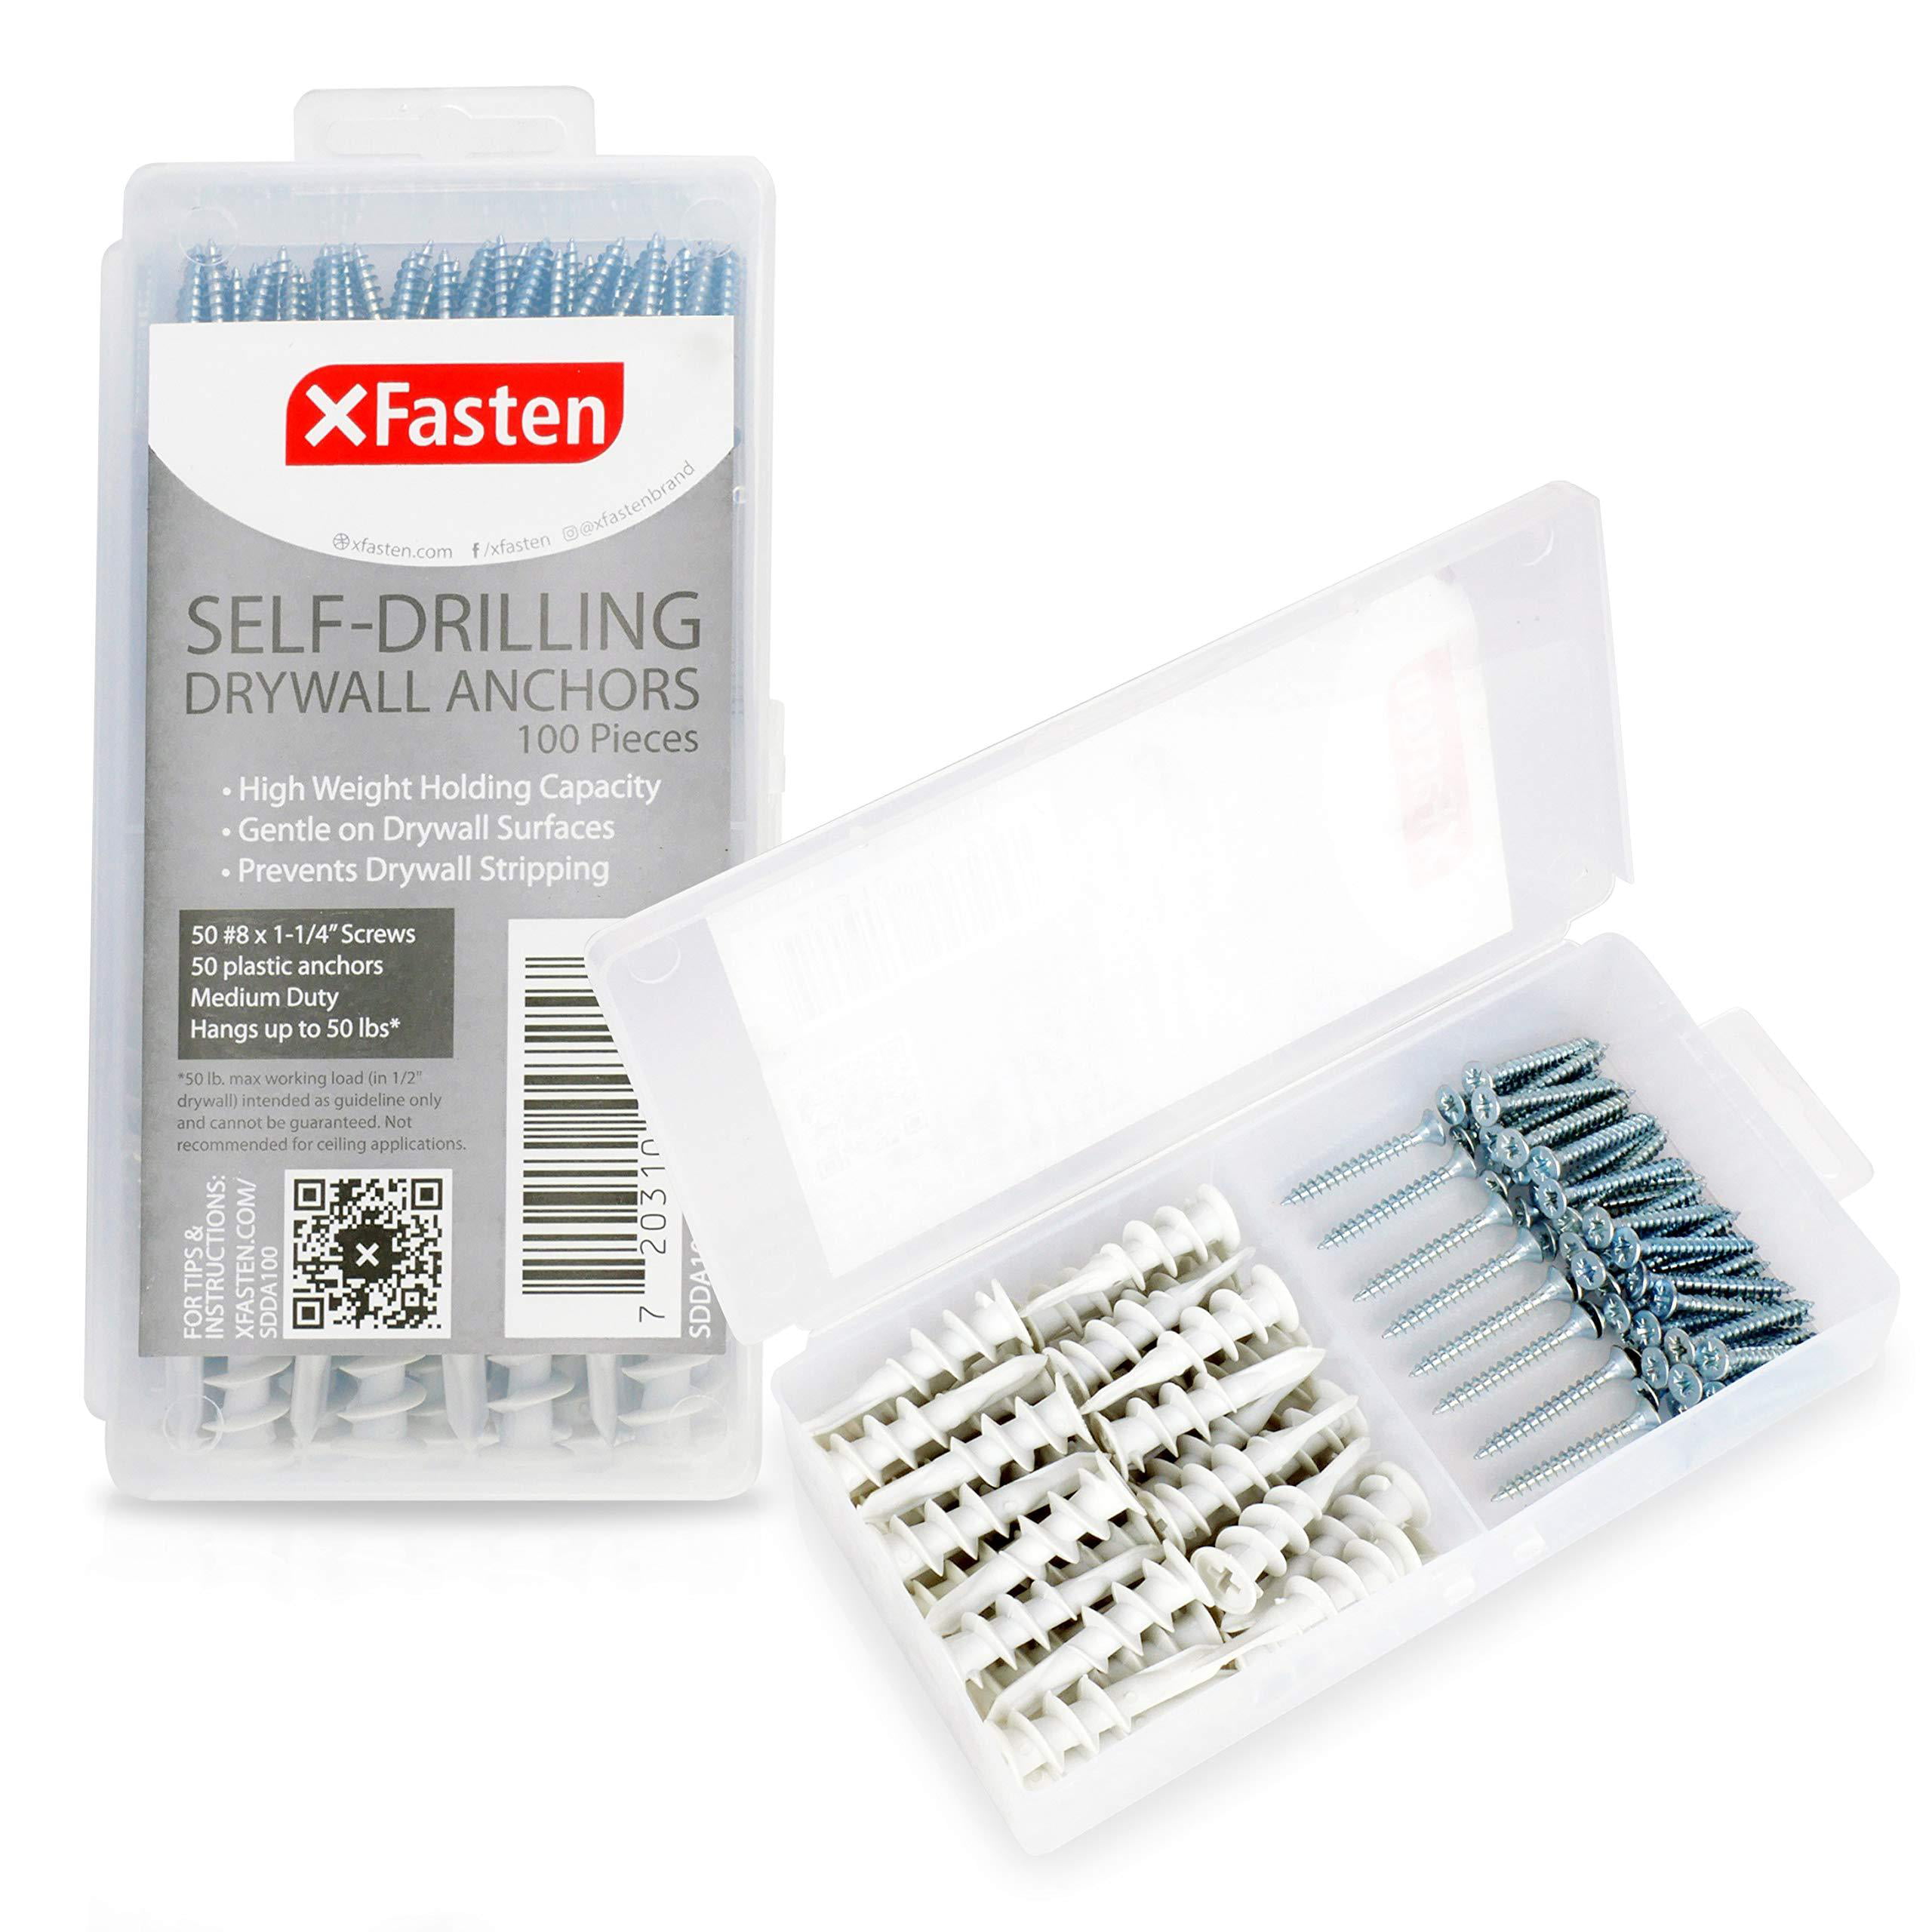 for sale online 100 Pieces XFasten Plastic Self Drilling Drywall Anchors With Screws Kit